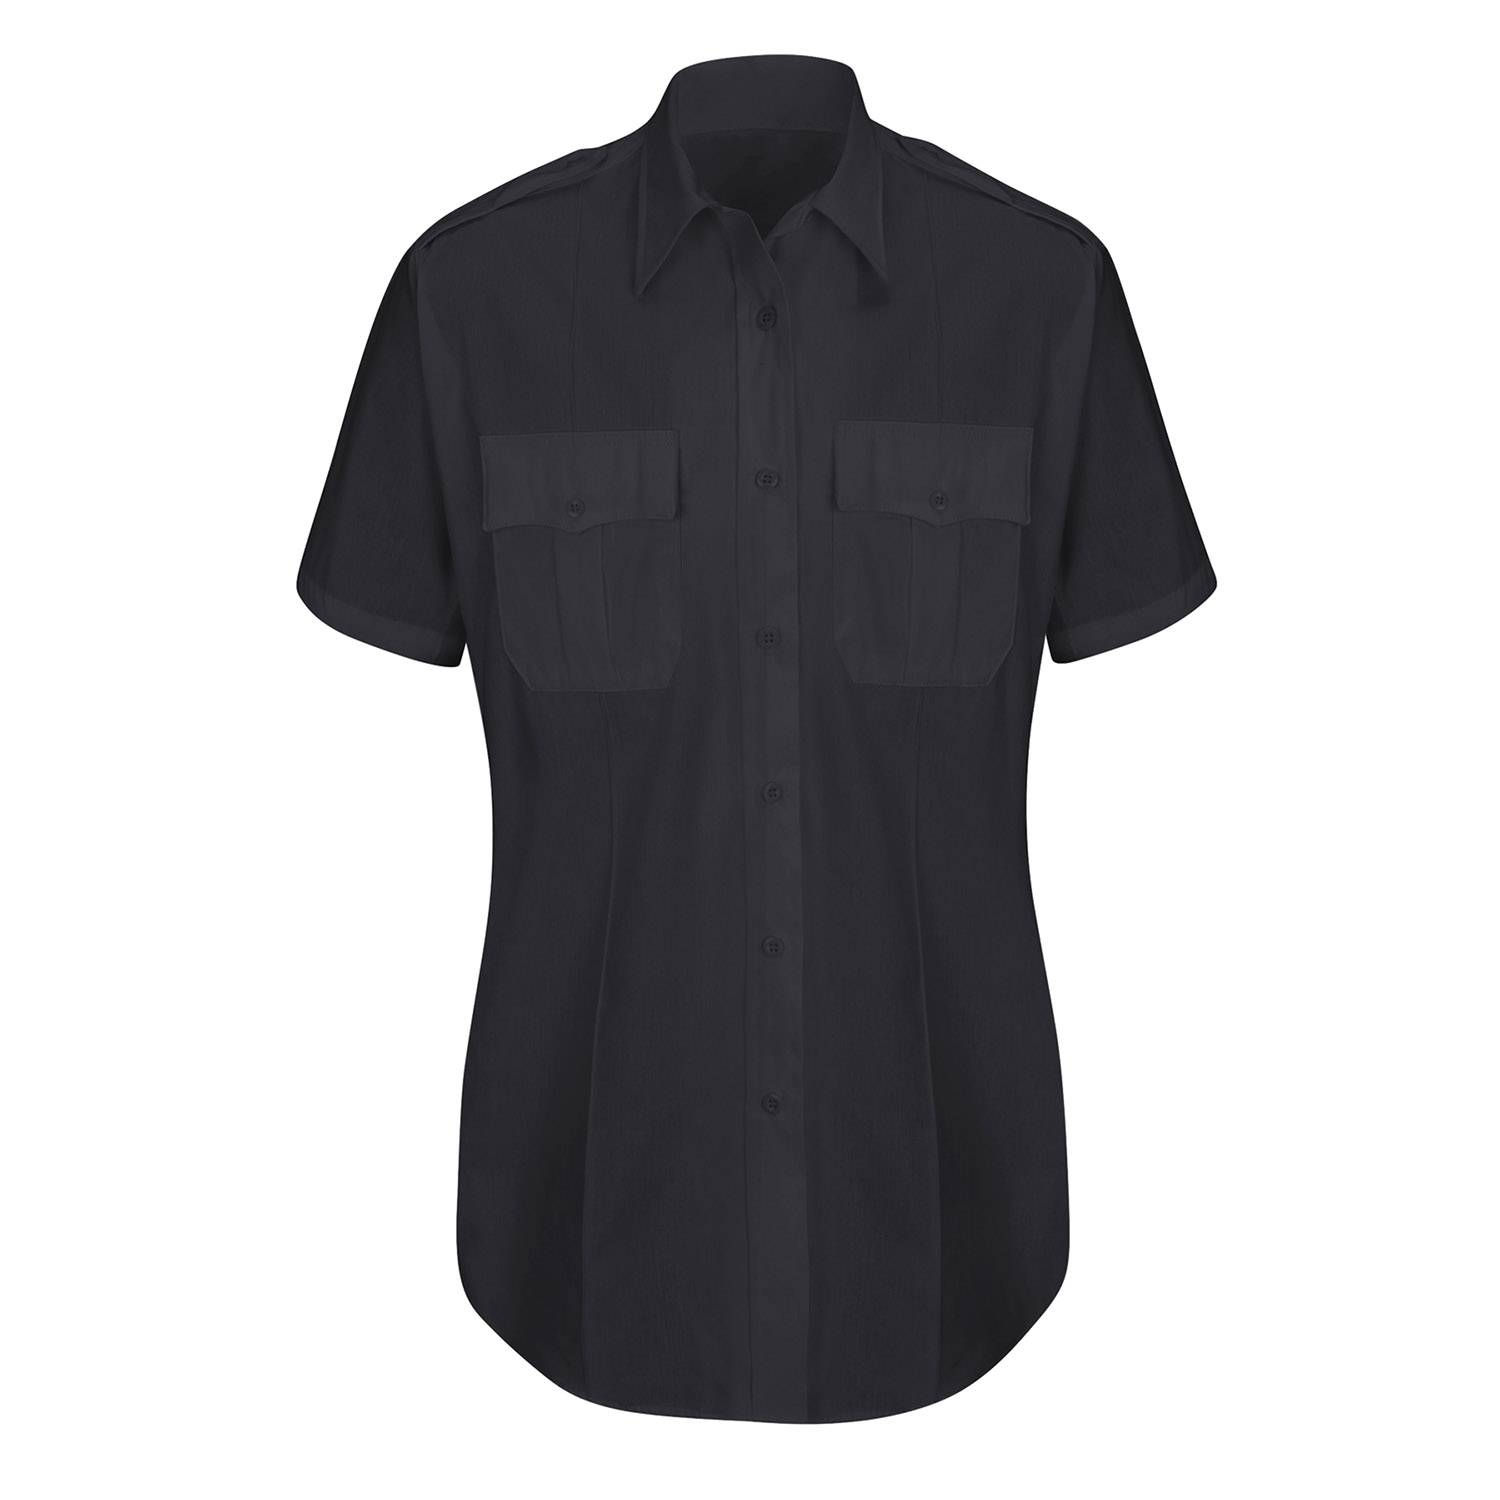 HORACE SMALL NEW DIMENSION PLUS WOMEN'S SHORT SLEEVE SHIRT